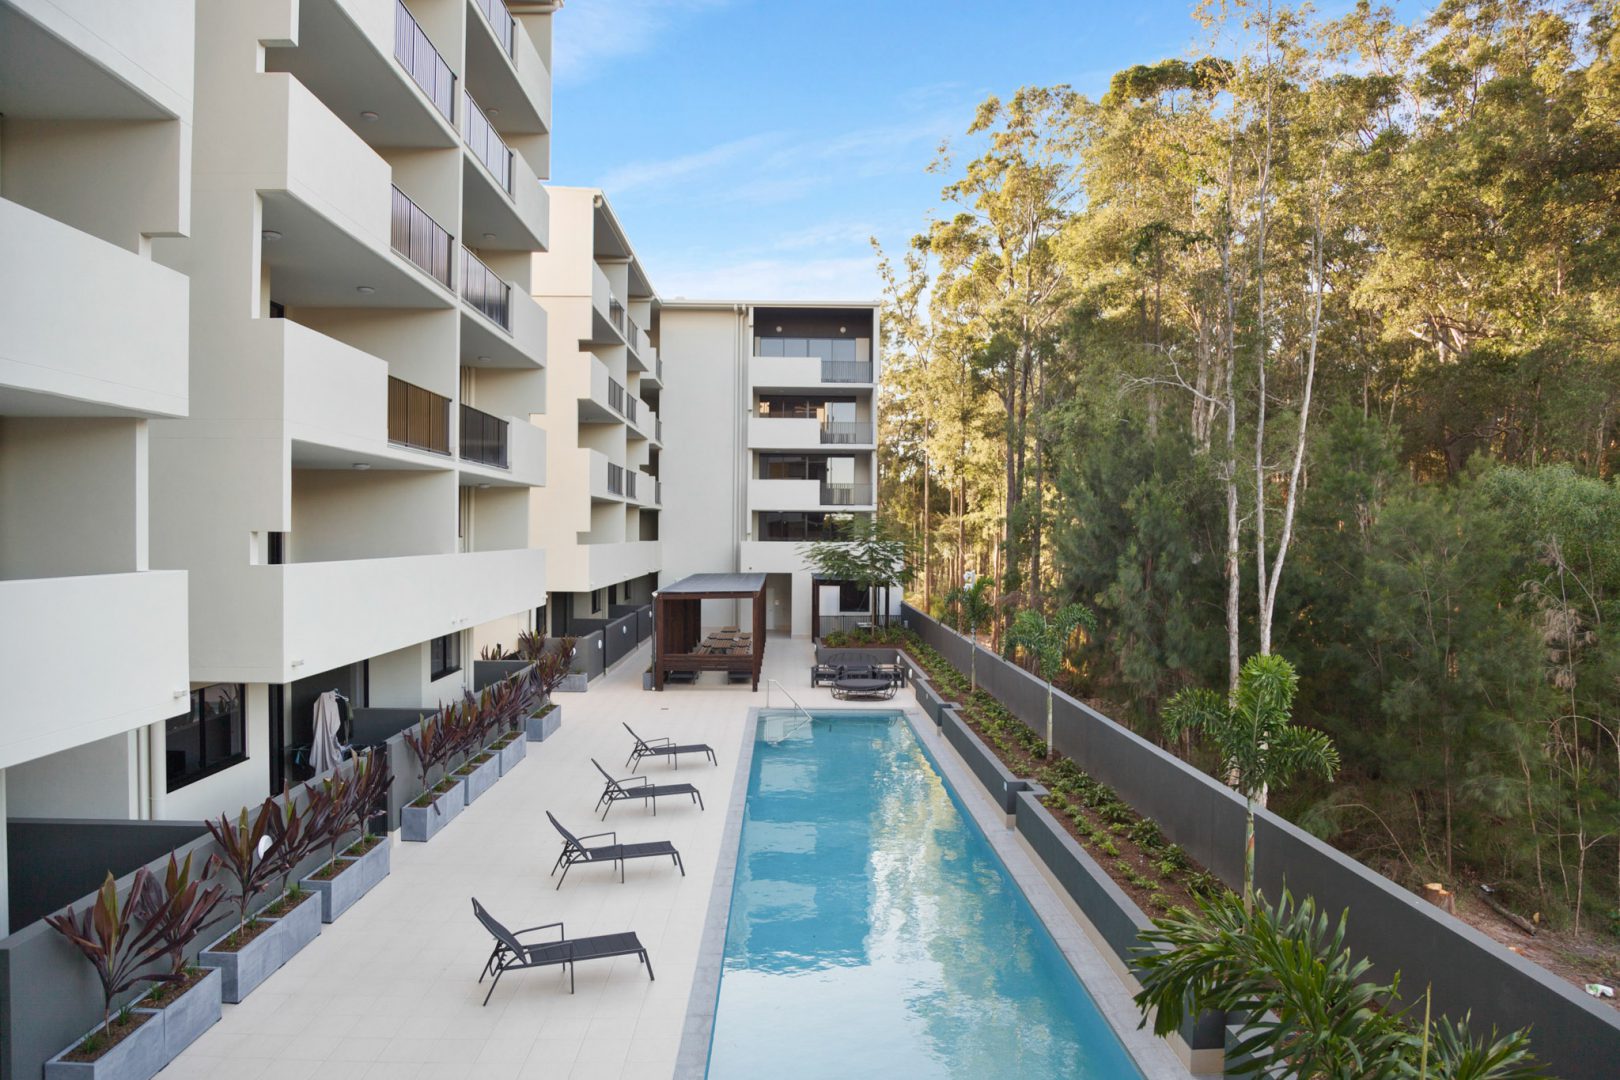 Forest Edge Pool Area (image supplied by the developer)